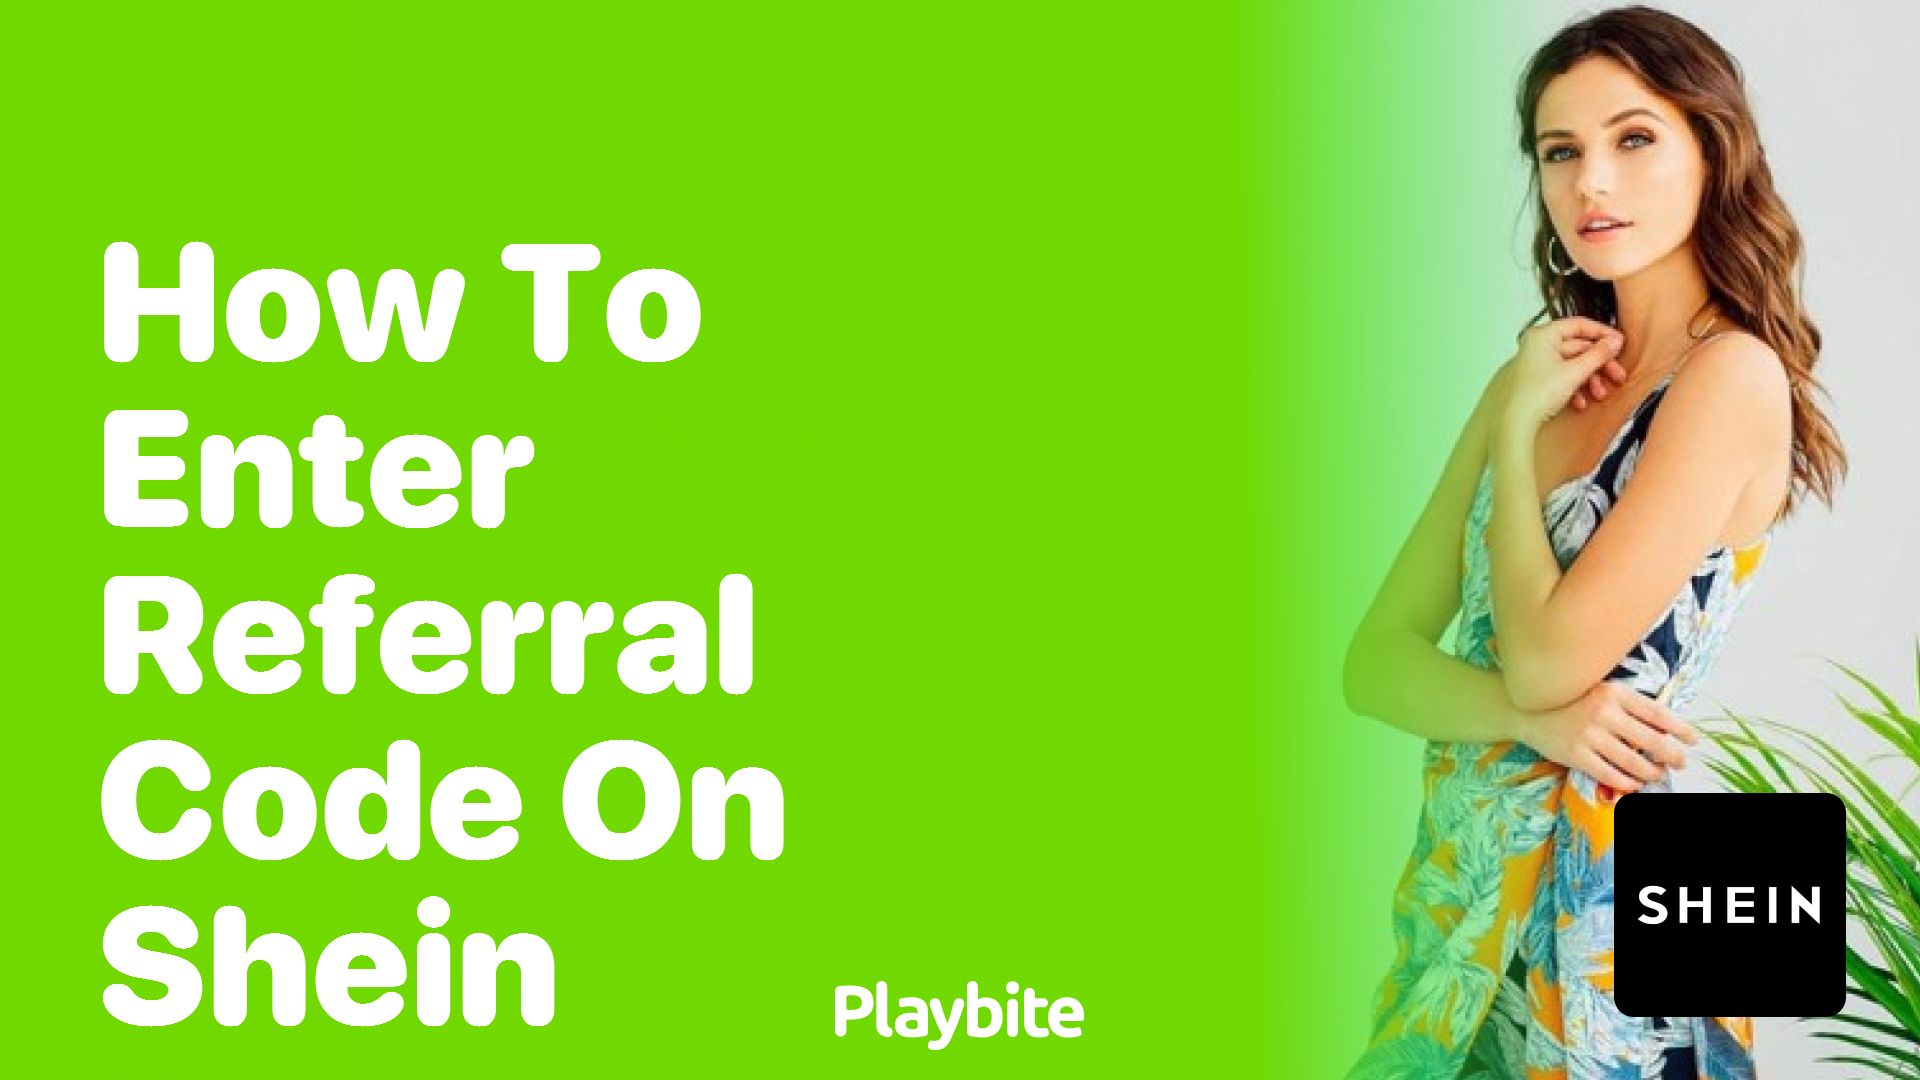 How to Enter Referral Code on SHEIN: A Simple Guide - Playbite